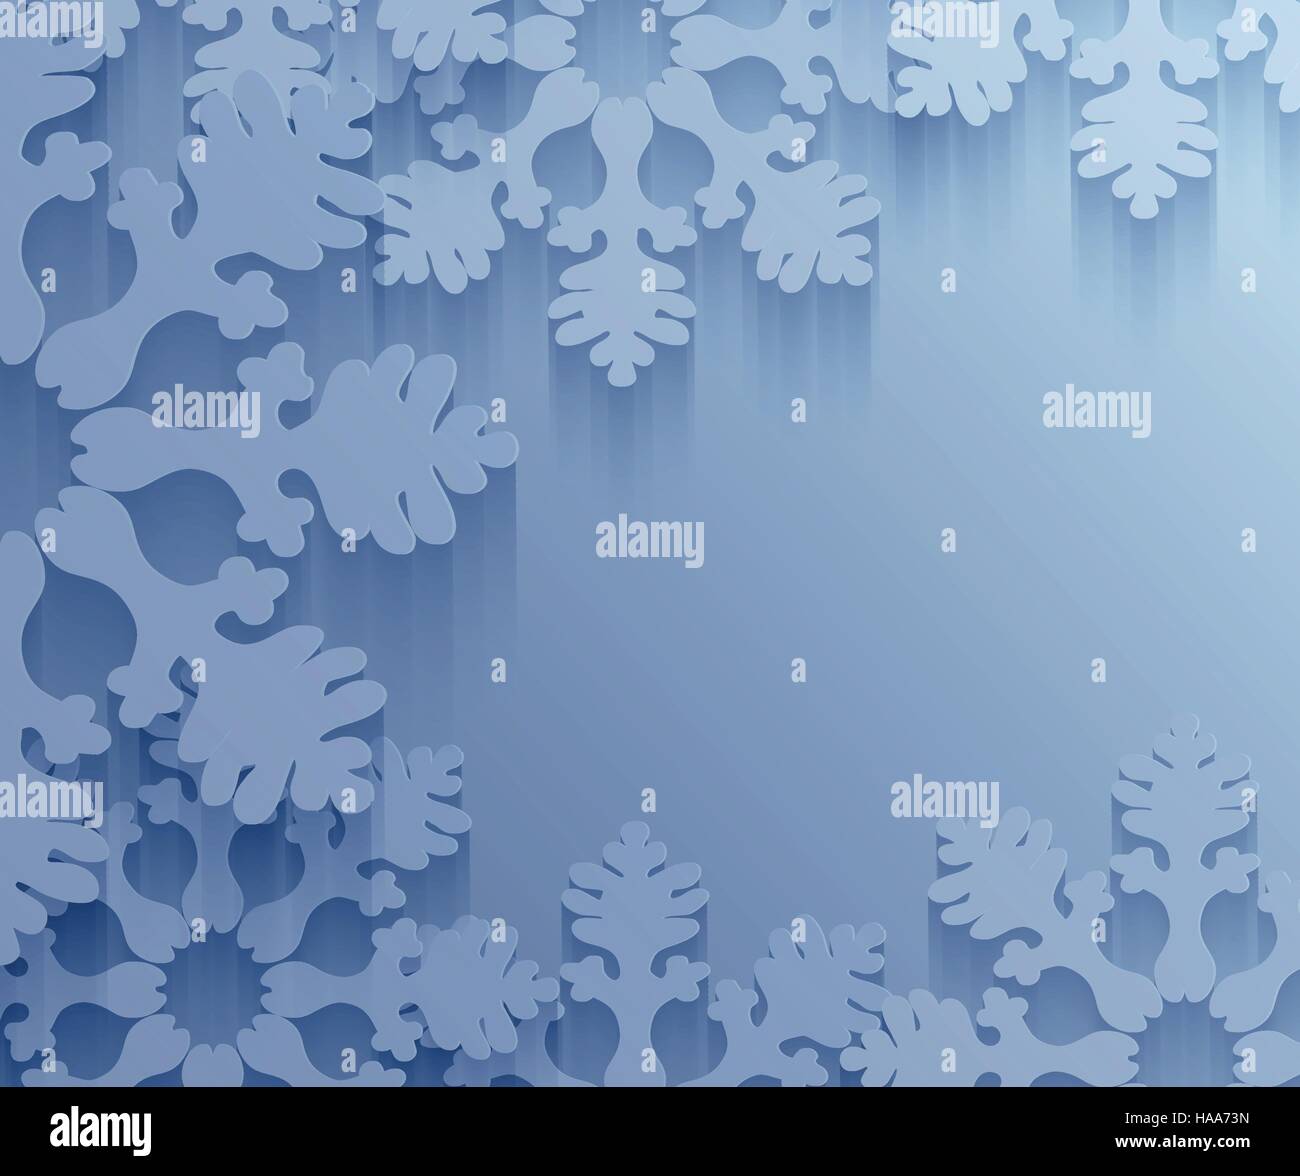 10,512 Artificial Snowflakes Images, Stock Photos, 3D objects